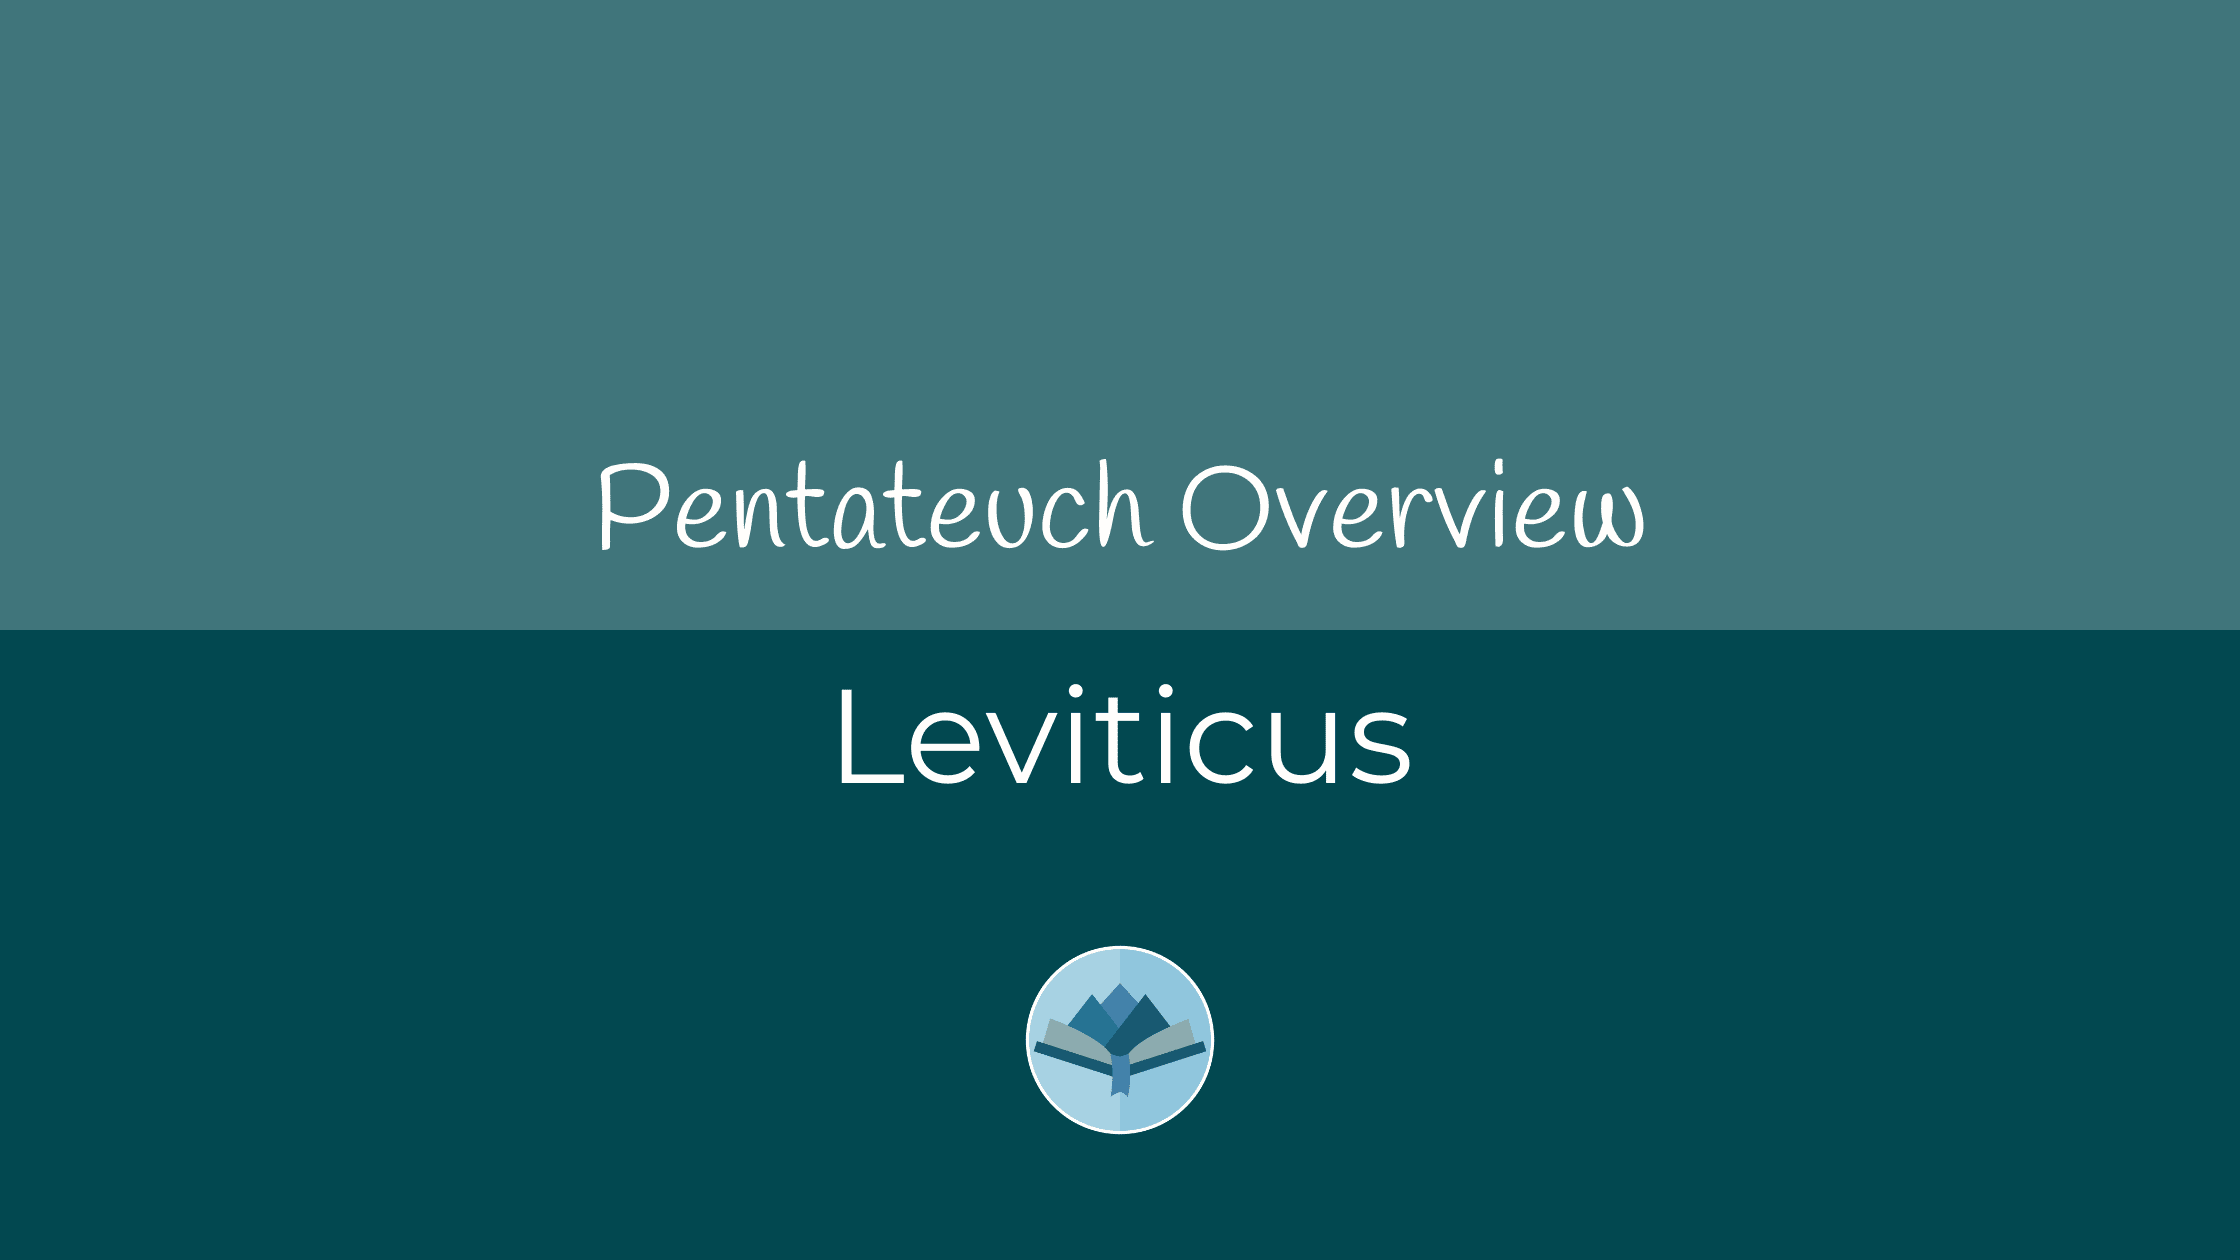 Leviticus Overview